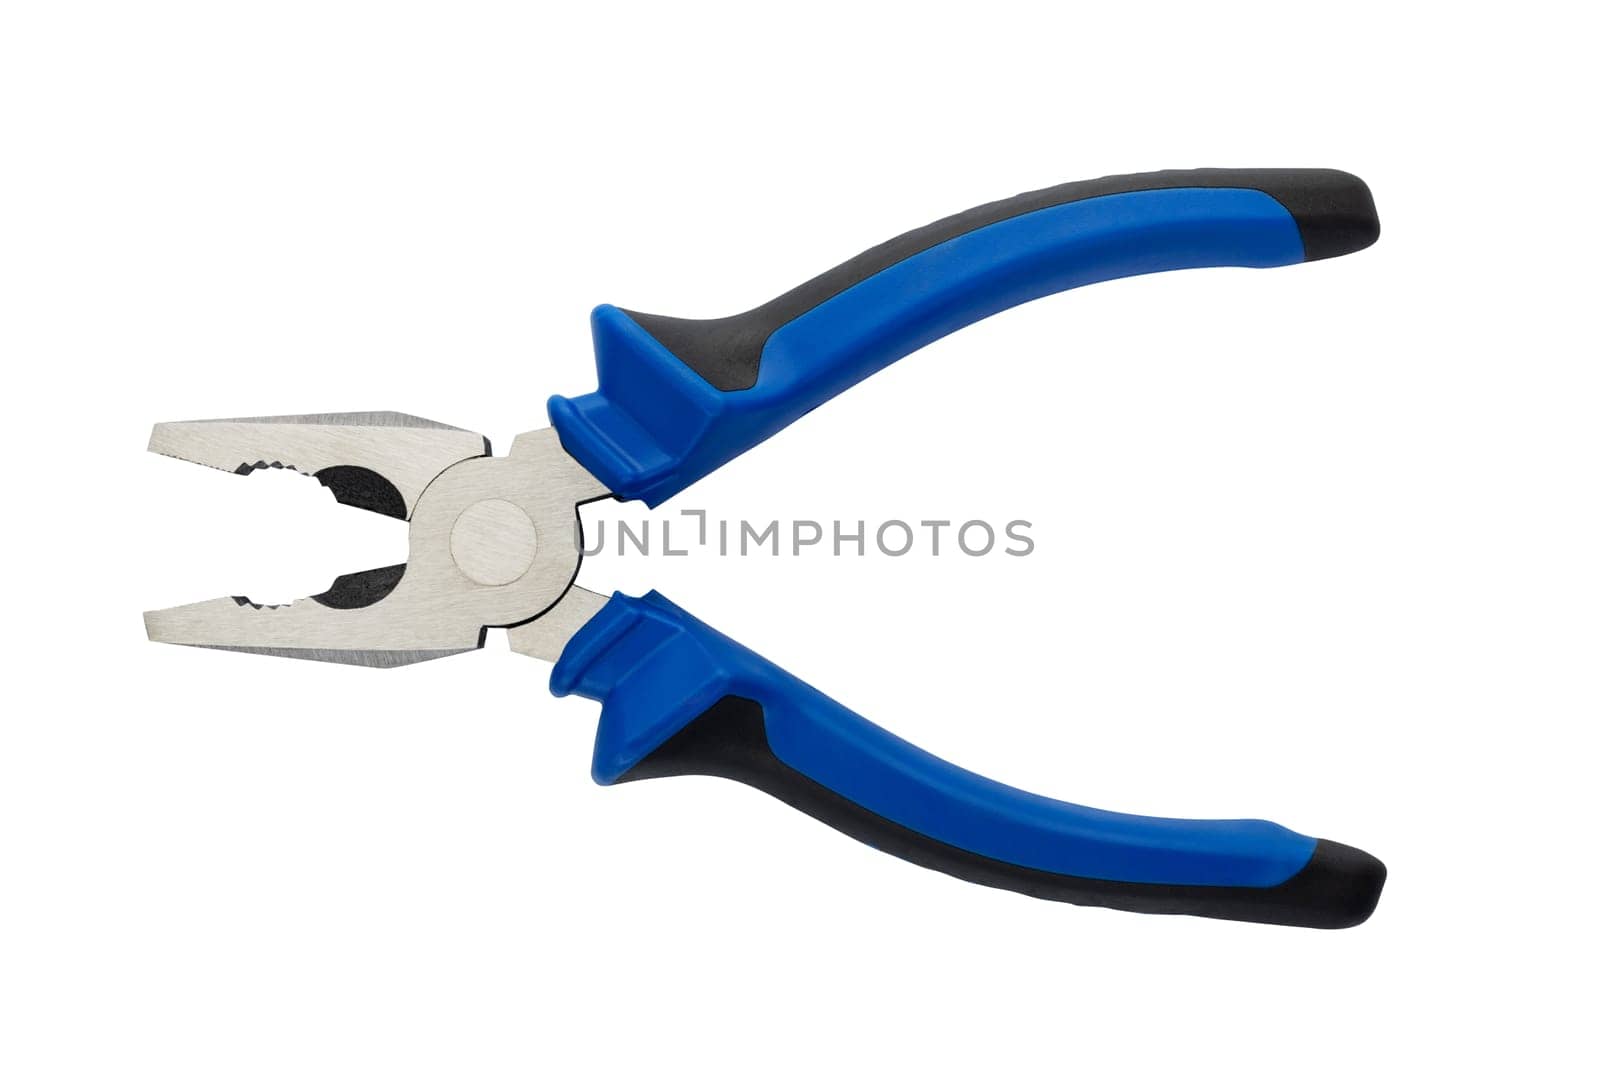 Professional electrician's pliers with blue and black handles isolated on a white backdrop, tool concept.